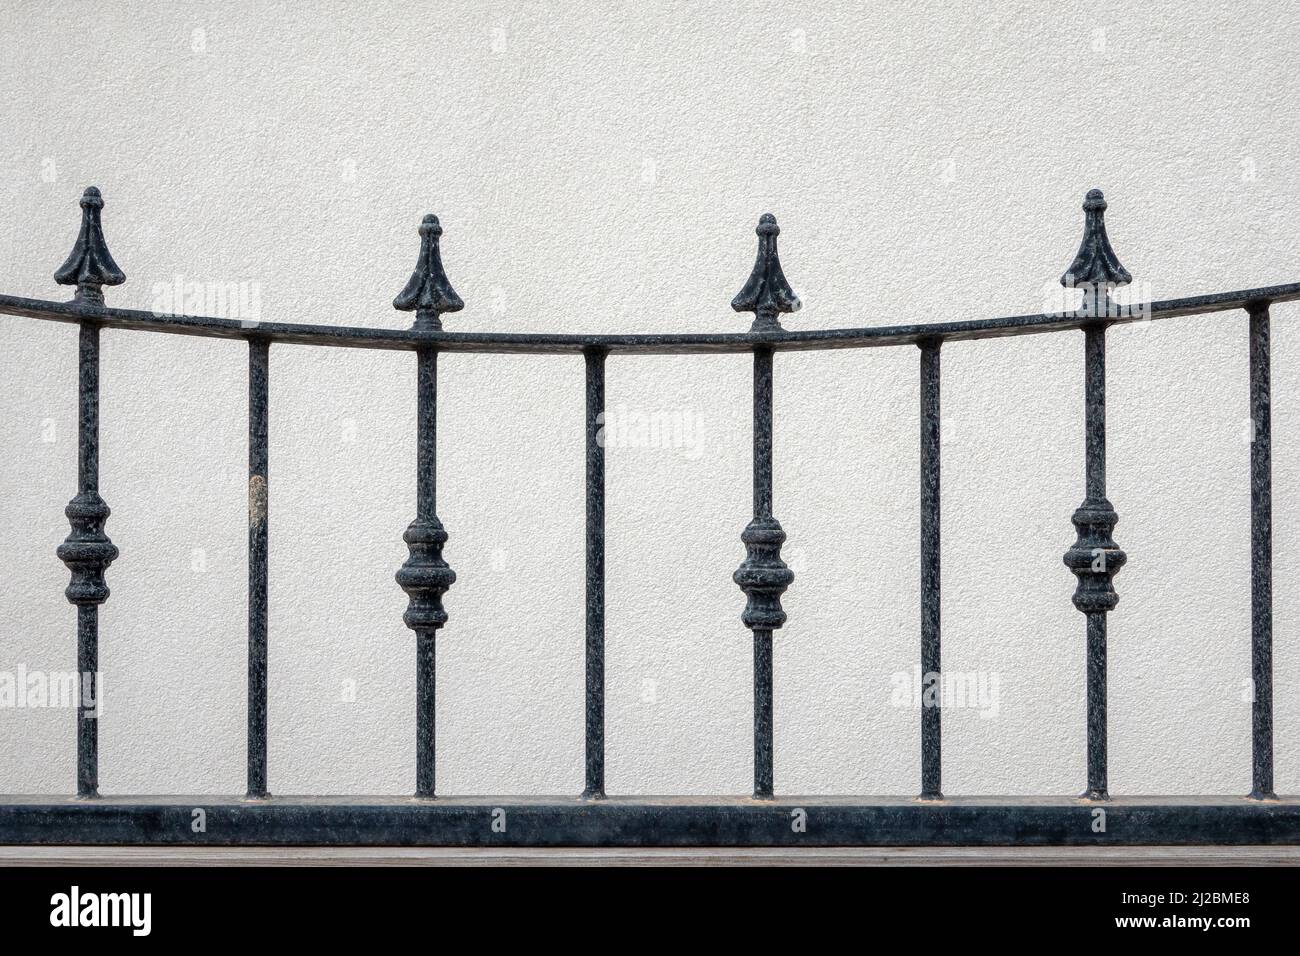 Short length of domestic metal railings against a white wall Stock Photo